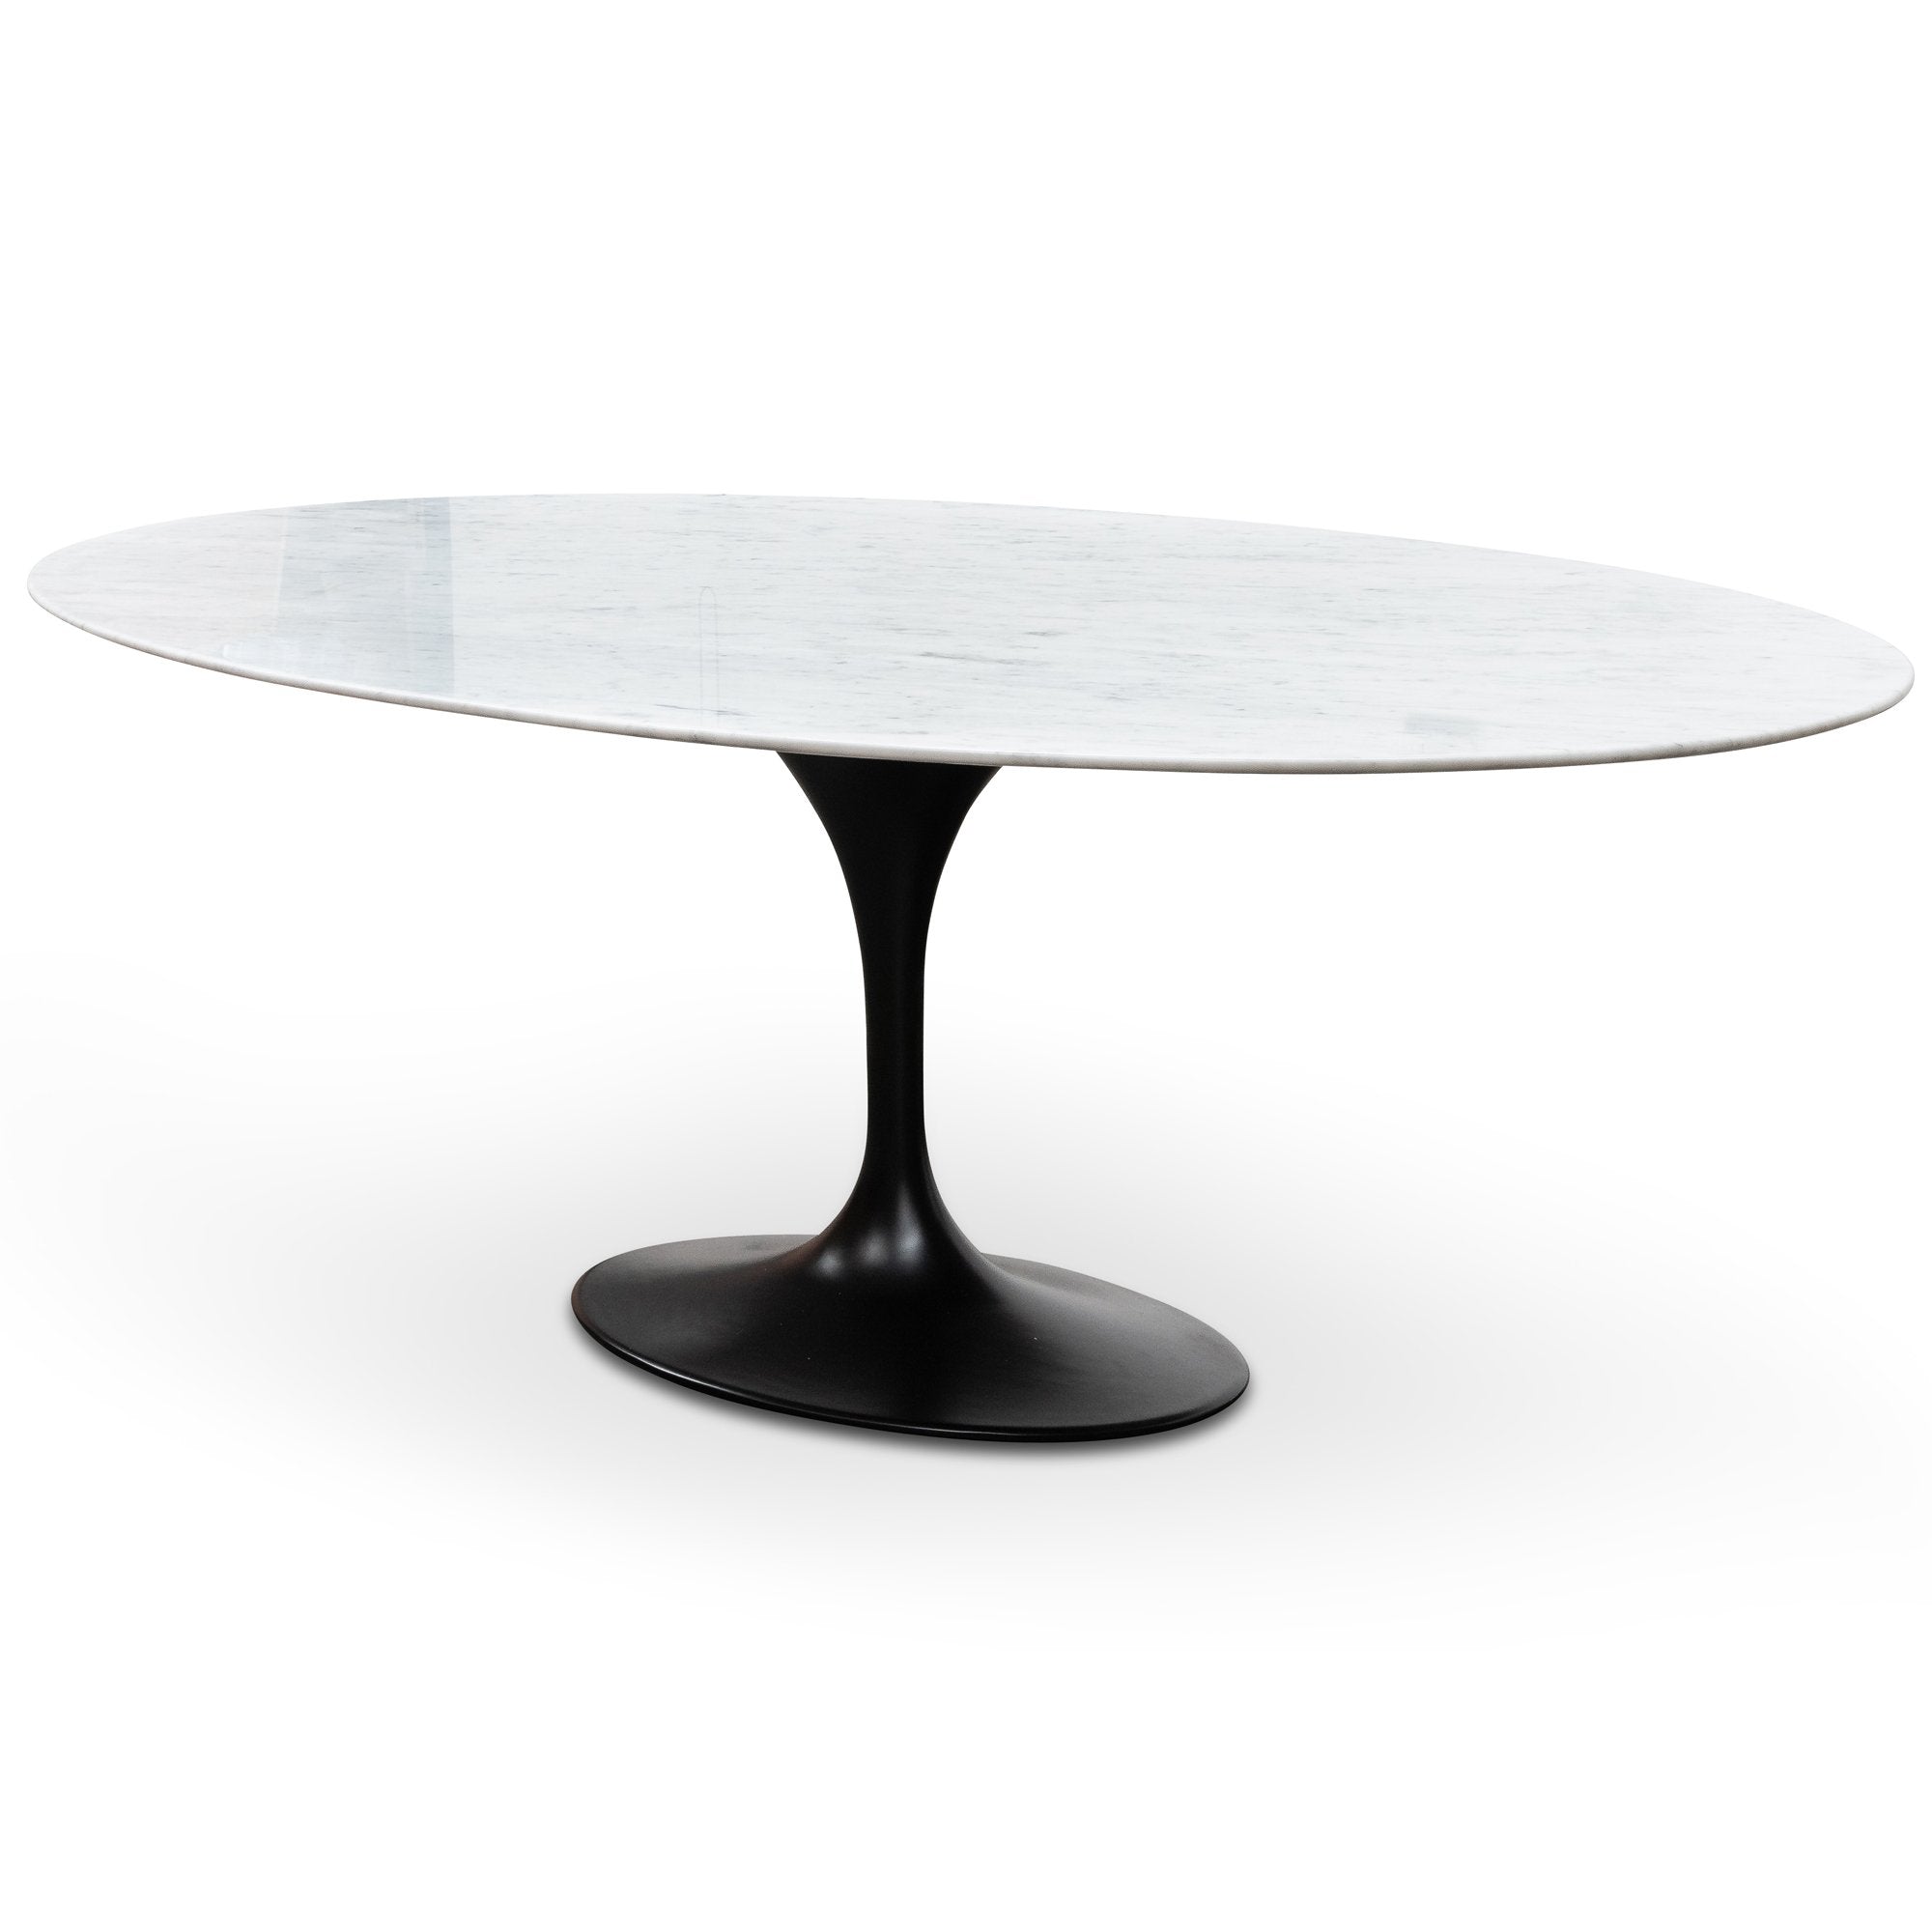 Rose 2m White Marble Oval Dining Table - Black Base - Dining Tables